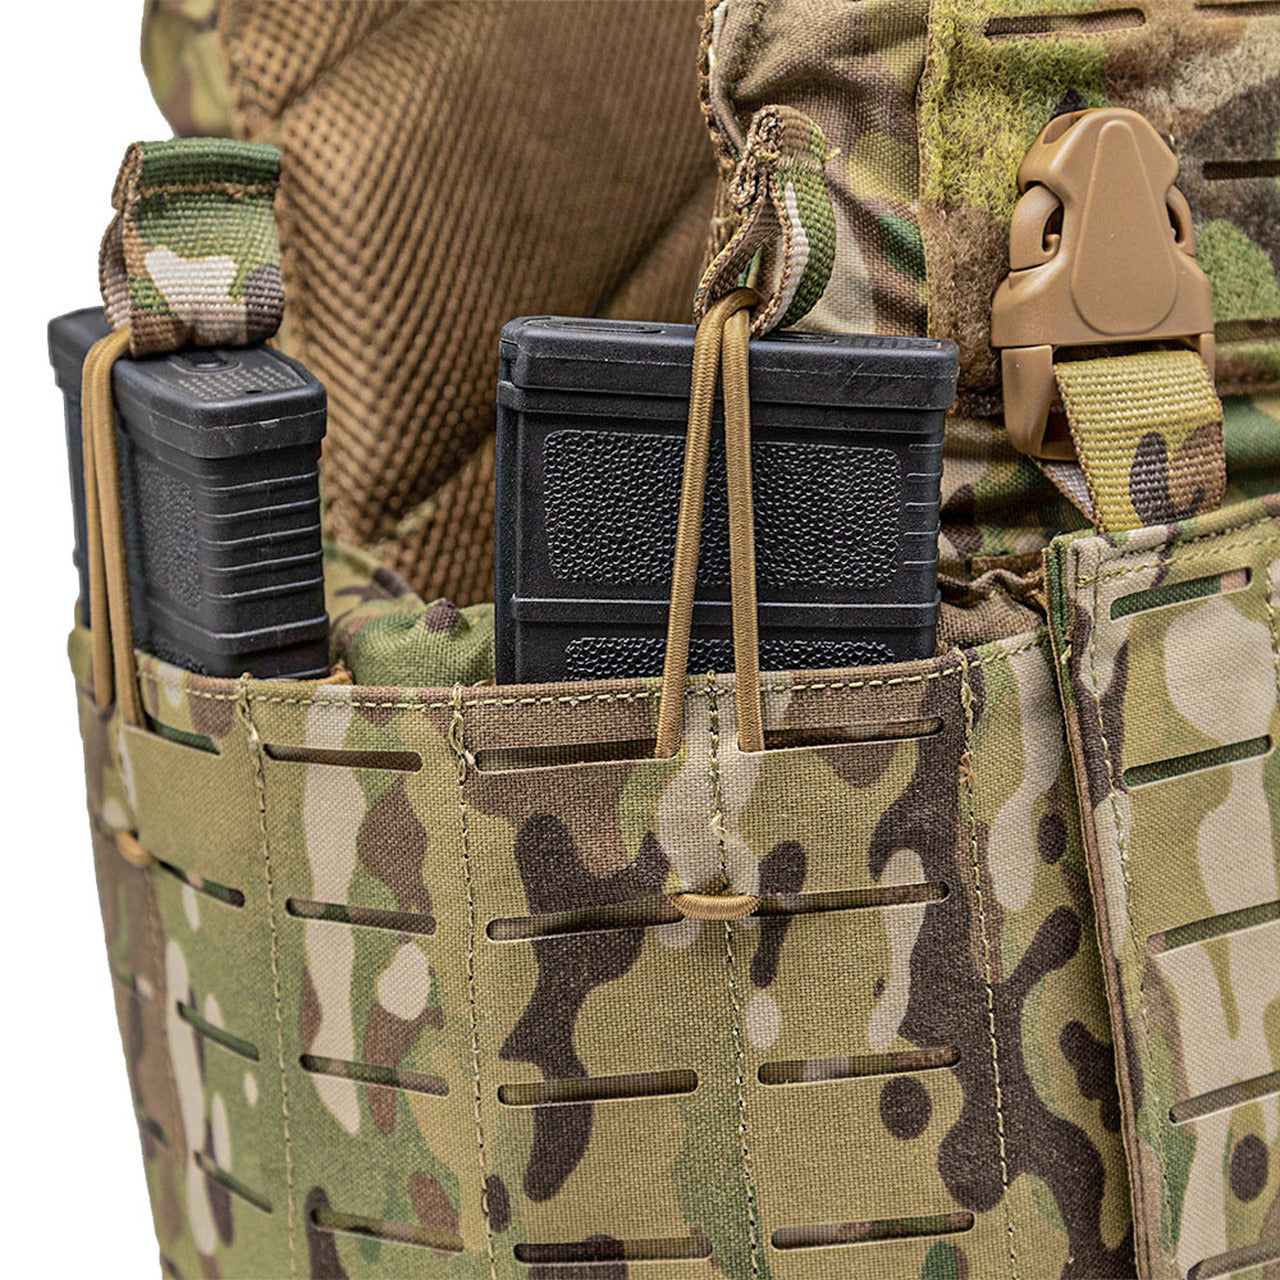 A Shellback Tactical Rampage 2.0 Plate Carrier with a magazine in it.